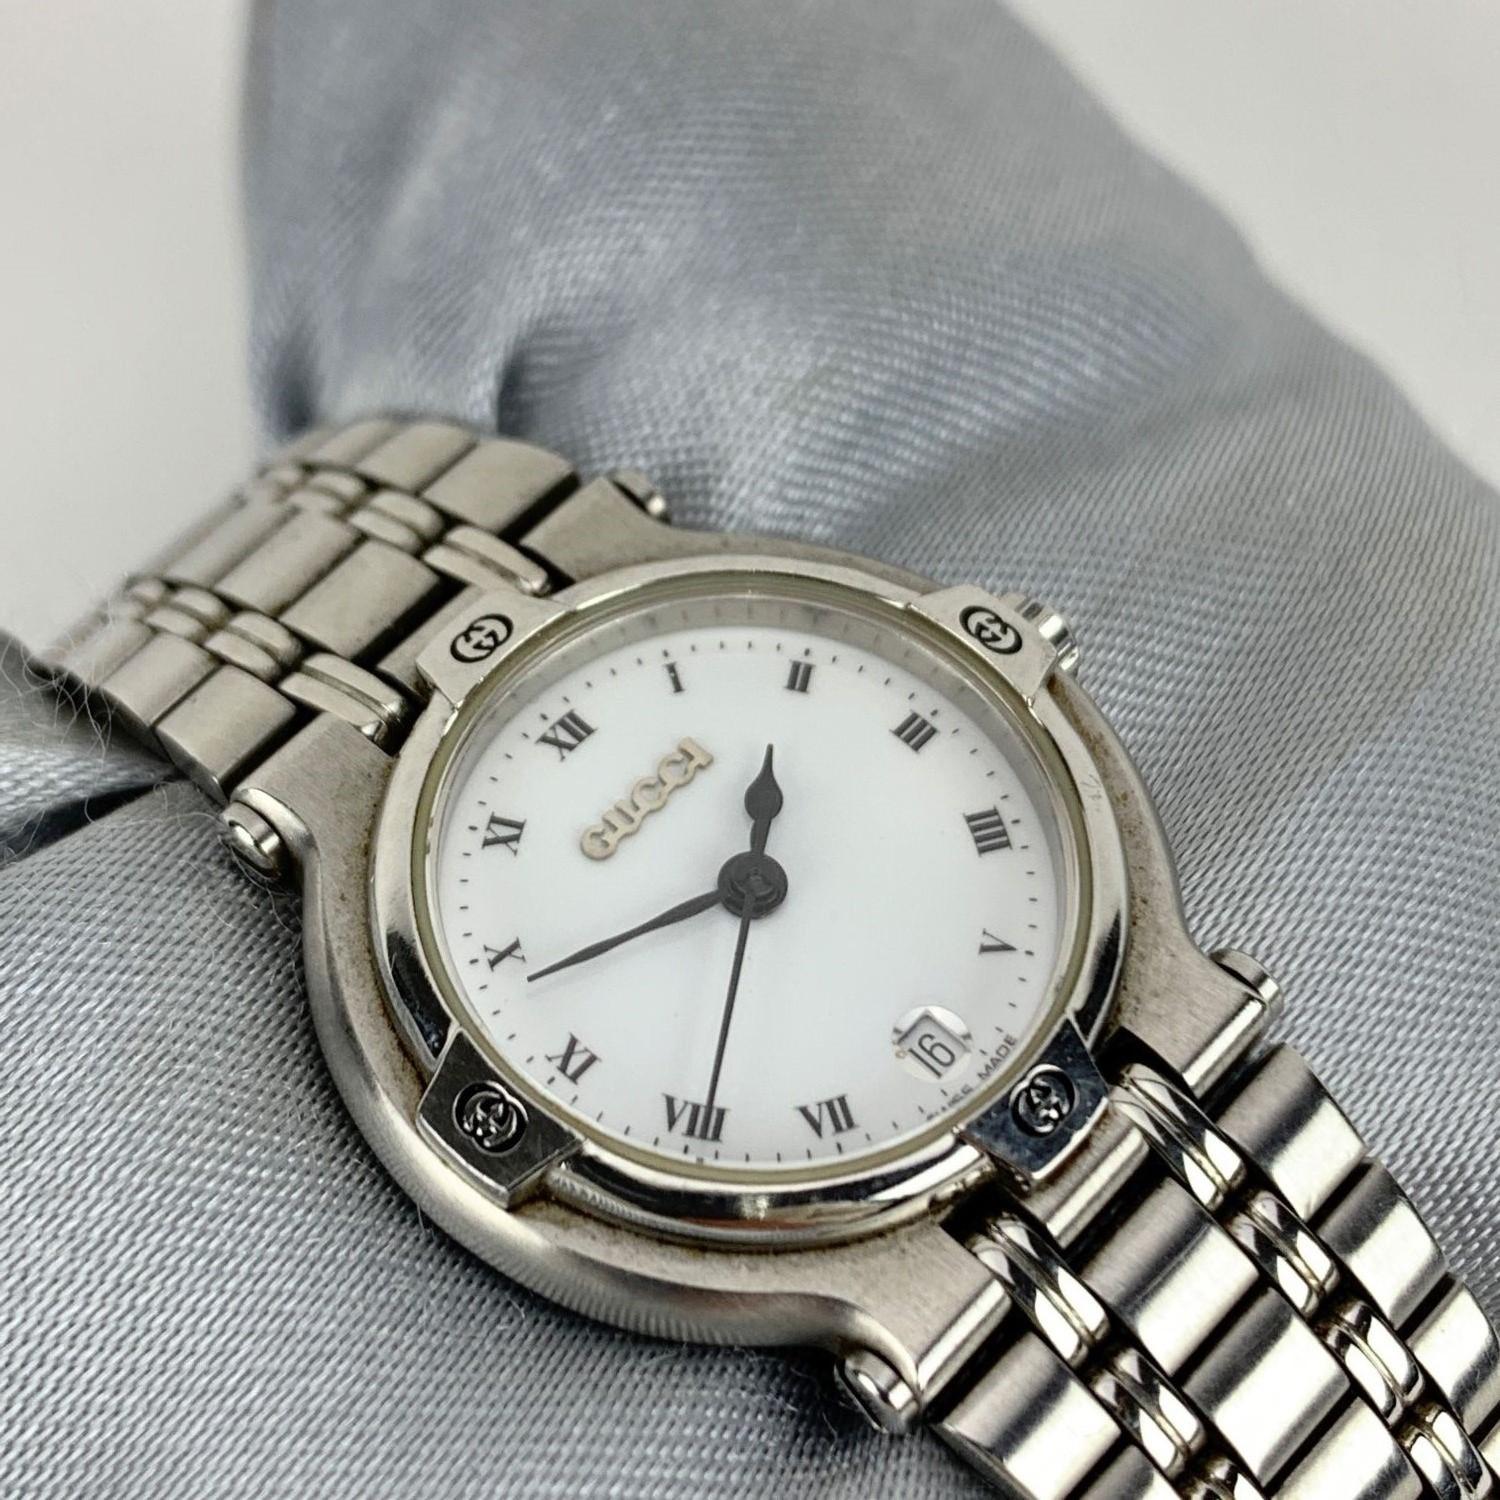 Gucci stainless steel wrist watch, mod. 9100 L. Stainless steel case. White Dial. Date at 6 o'clock. Sapphire crystal. Swiss Made. Quartz movement. Gucci written on face. Gucci crest on the reverse of the case. GG logo engraved on the clasp. Water